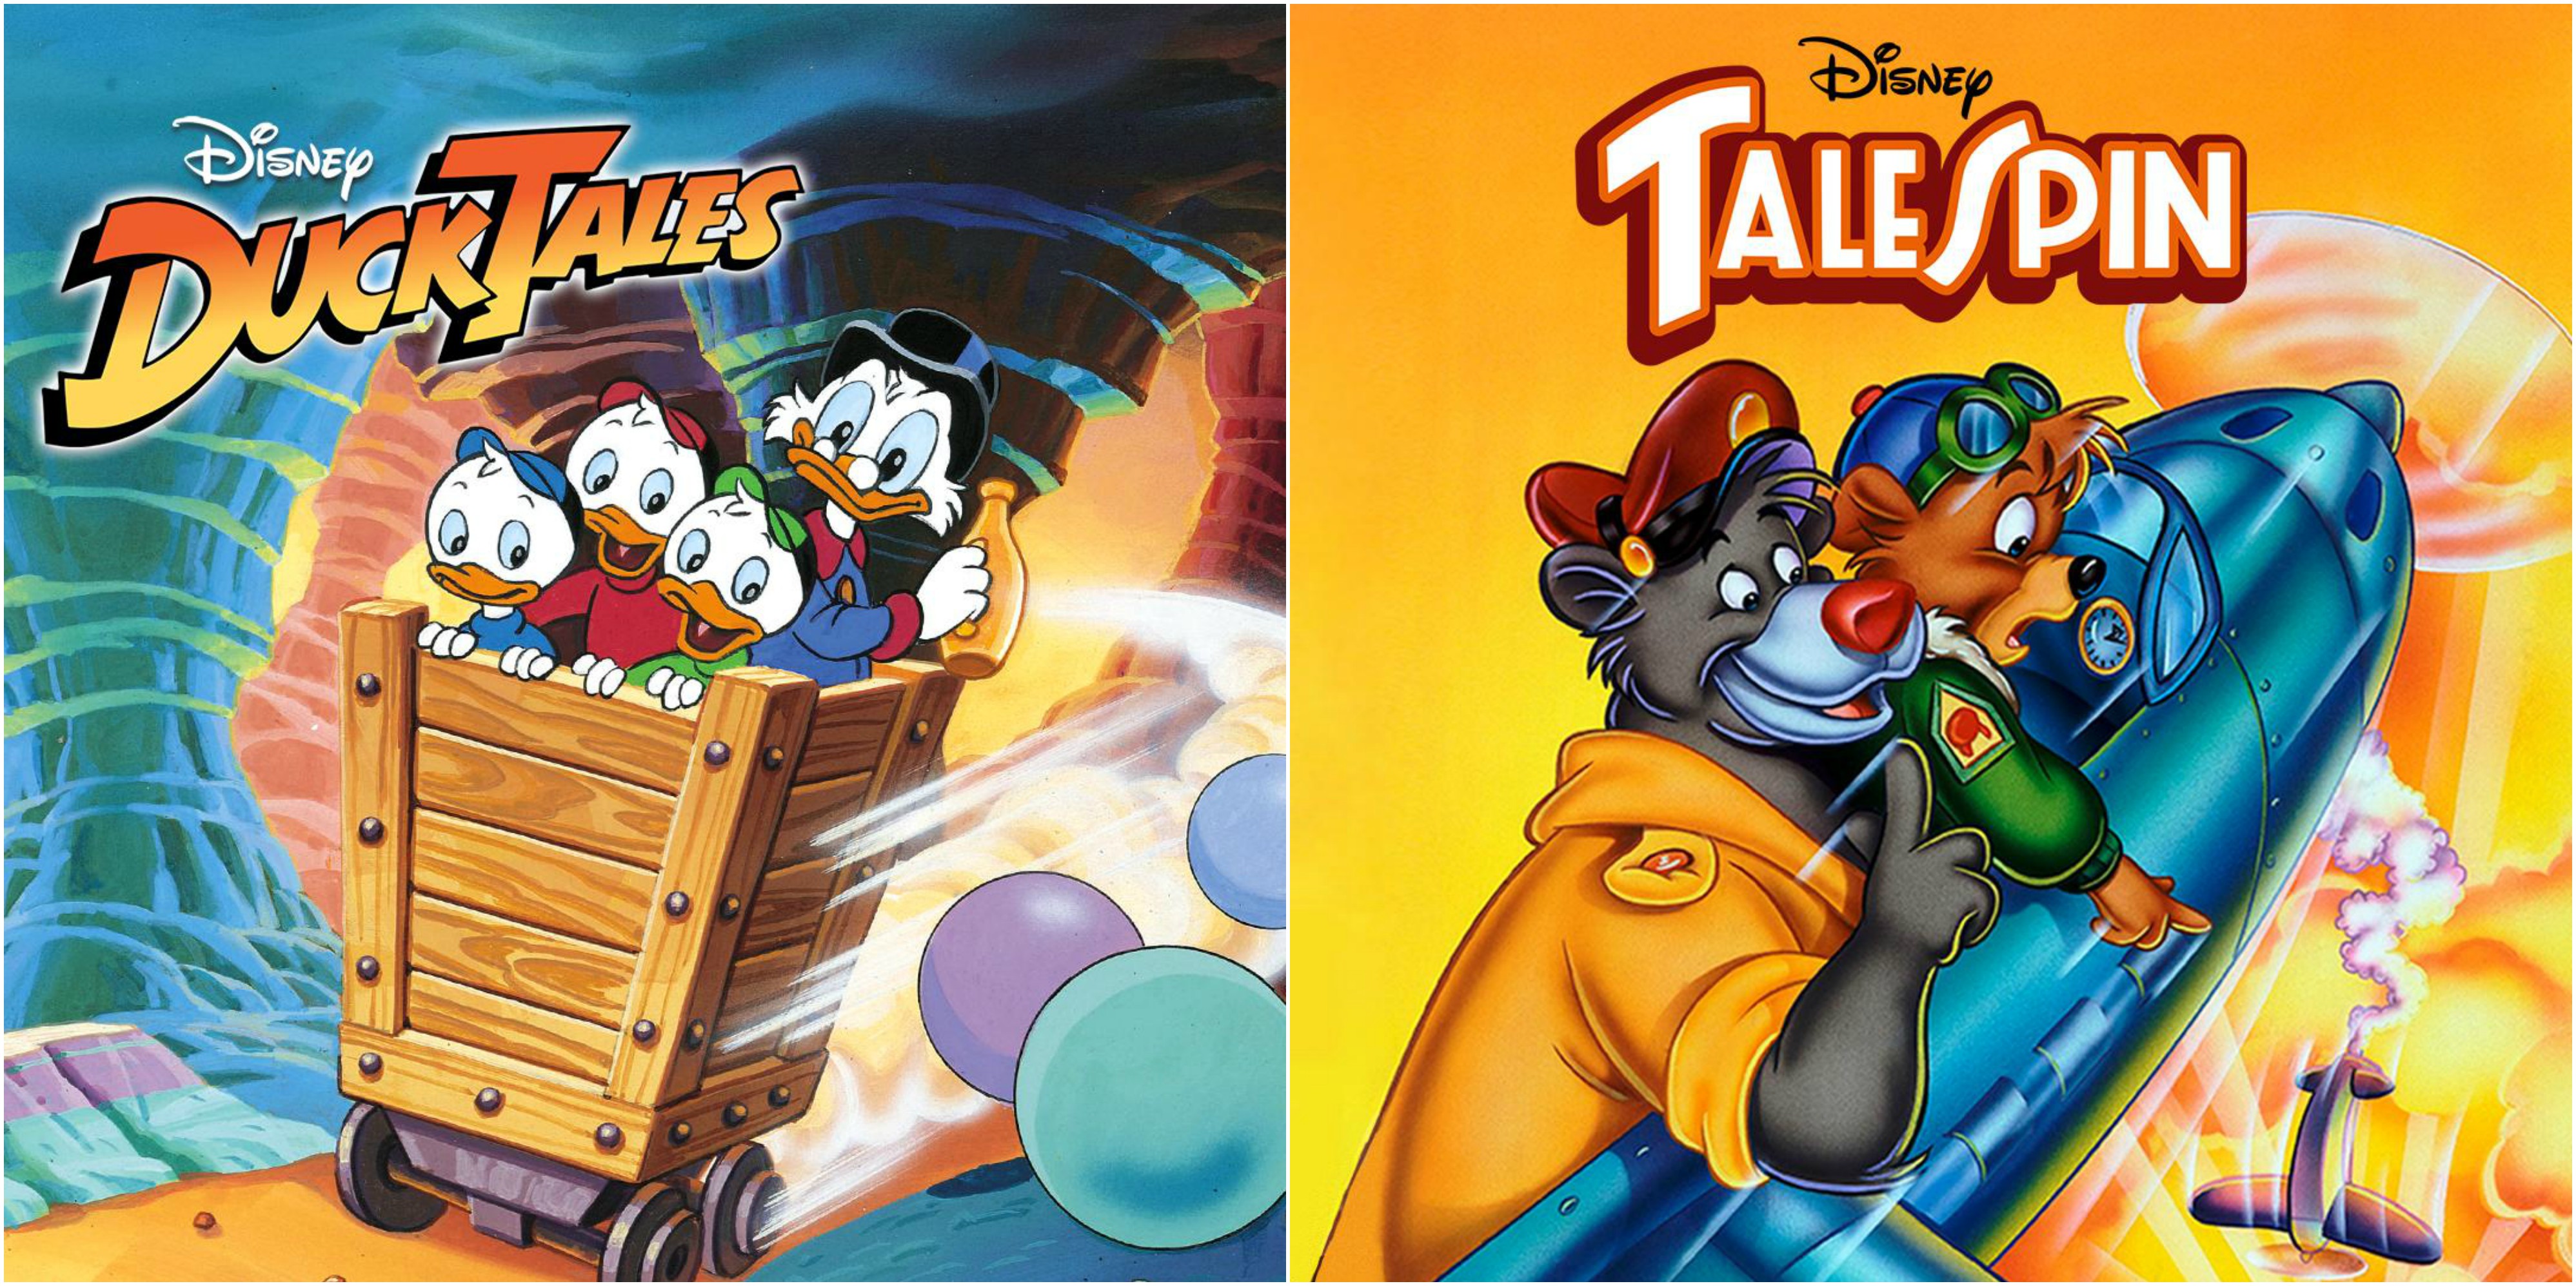 DuckTales, Chip ‘n Dale Rescue Rangers, TaleSpin, and Darkwing Duck Coming to Disney+